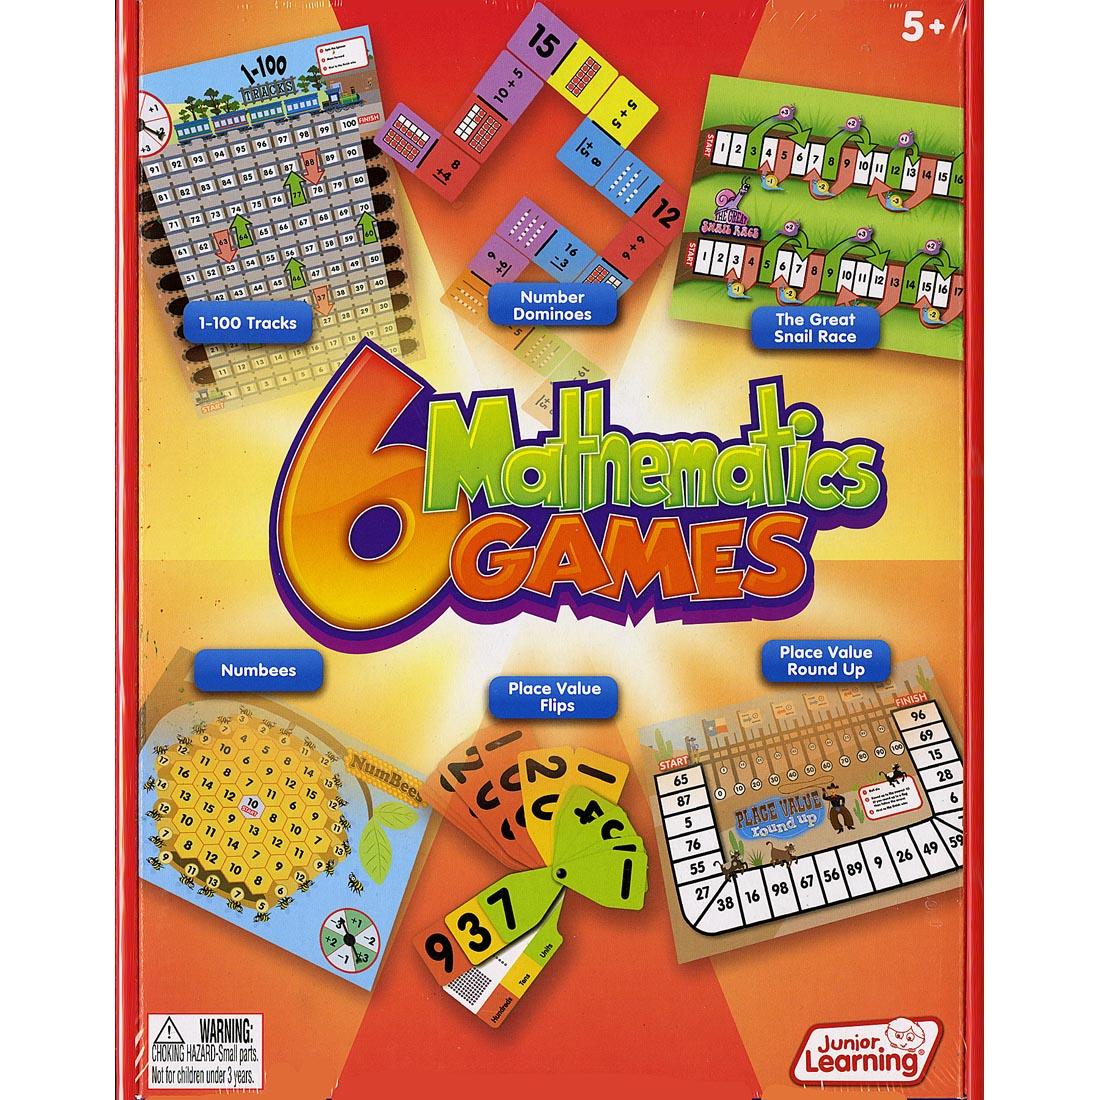 6 Mathematics Games by Junior Learning